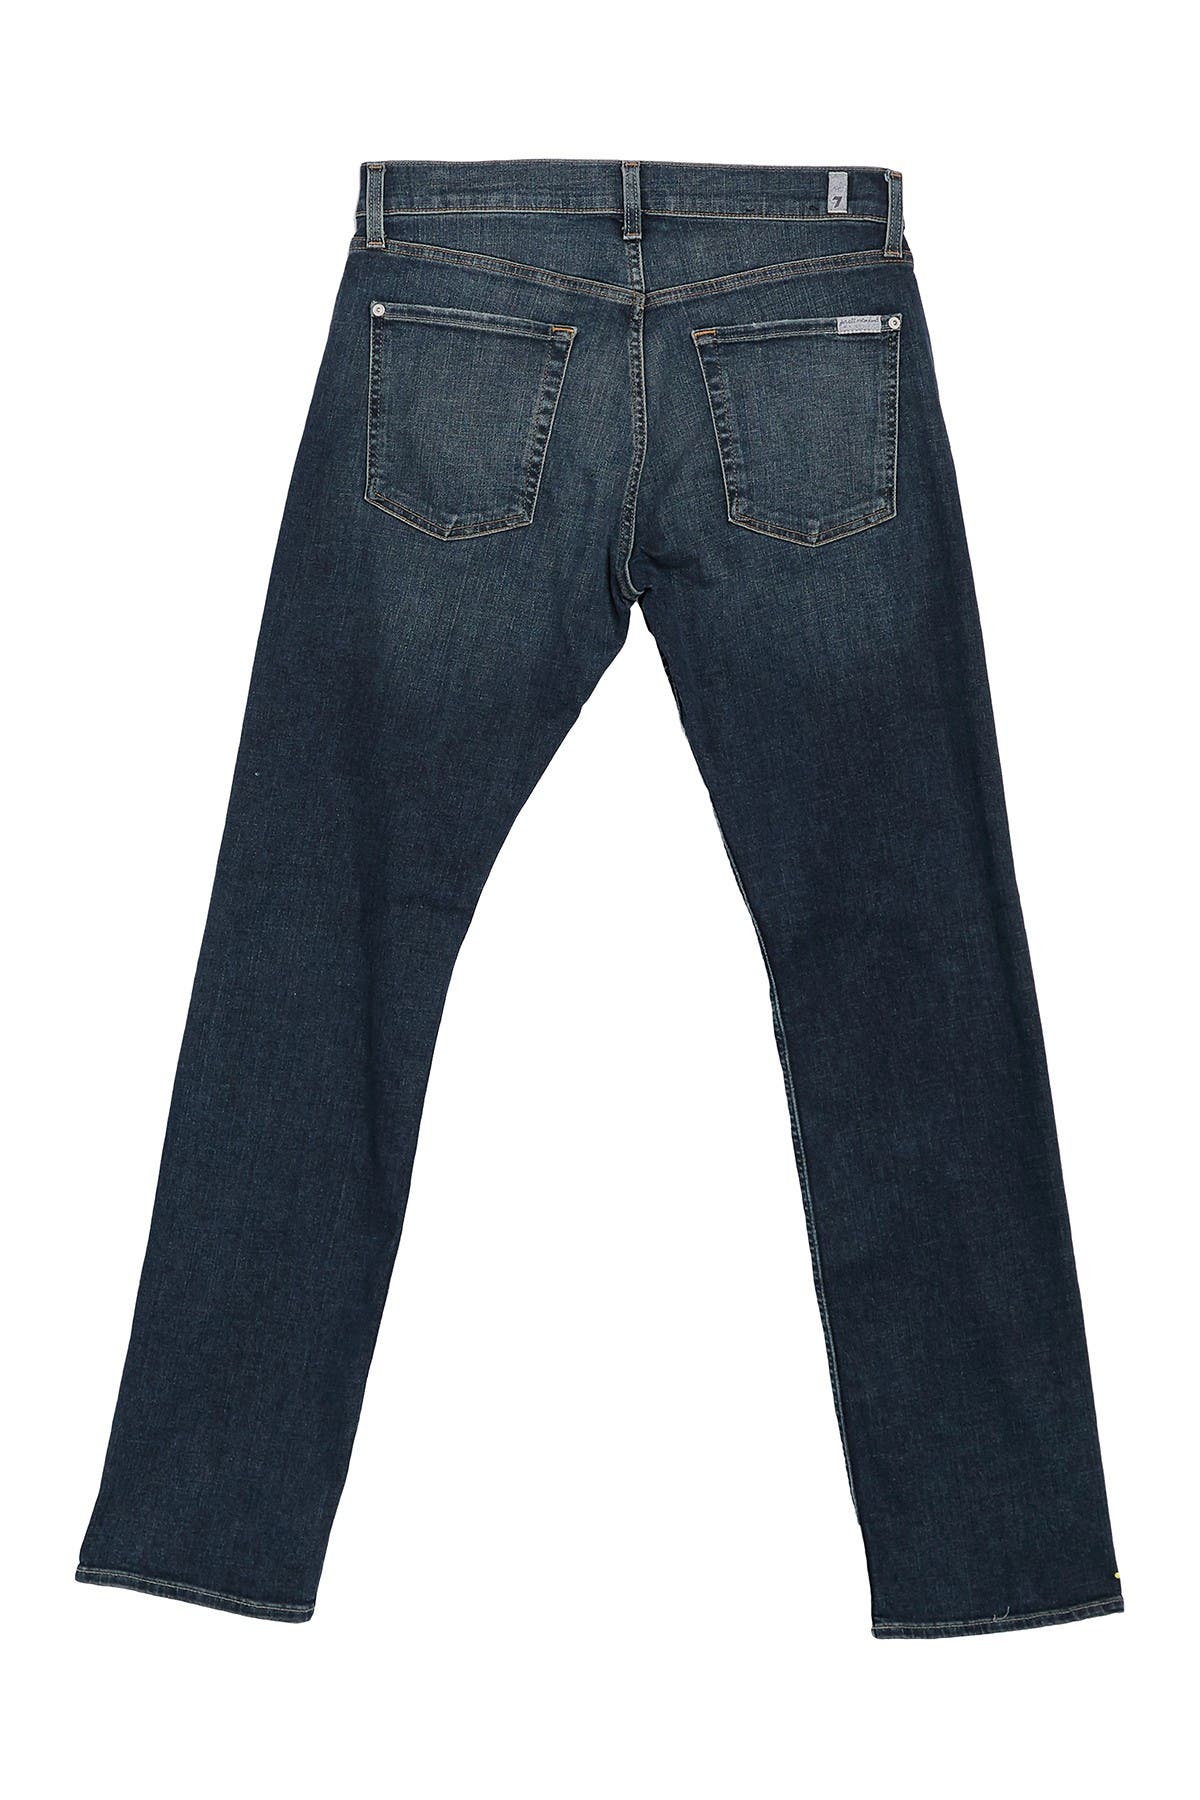 7 For All Mankind Straight Leg Jeans In Blue